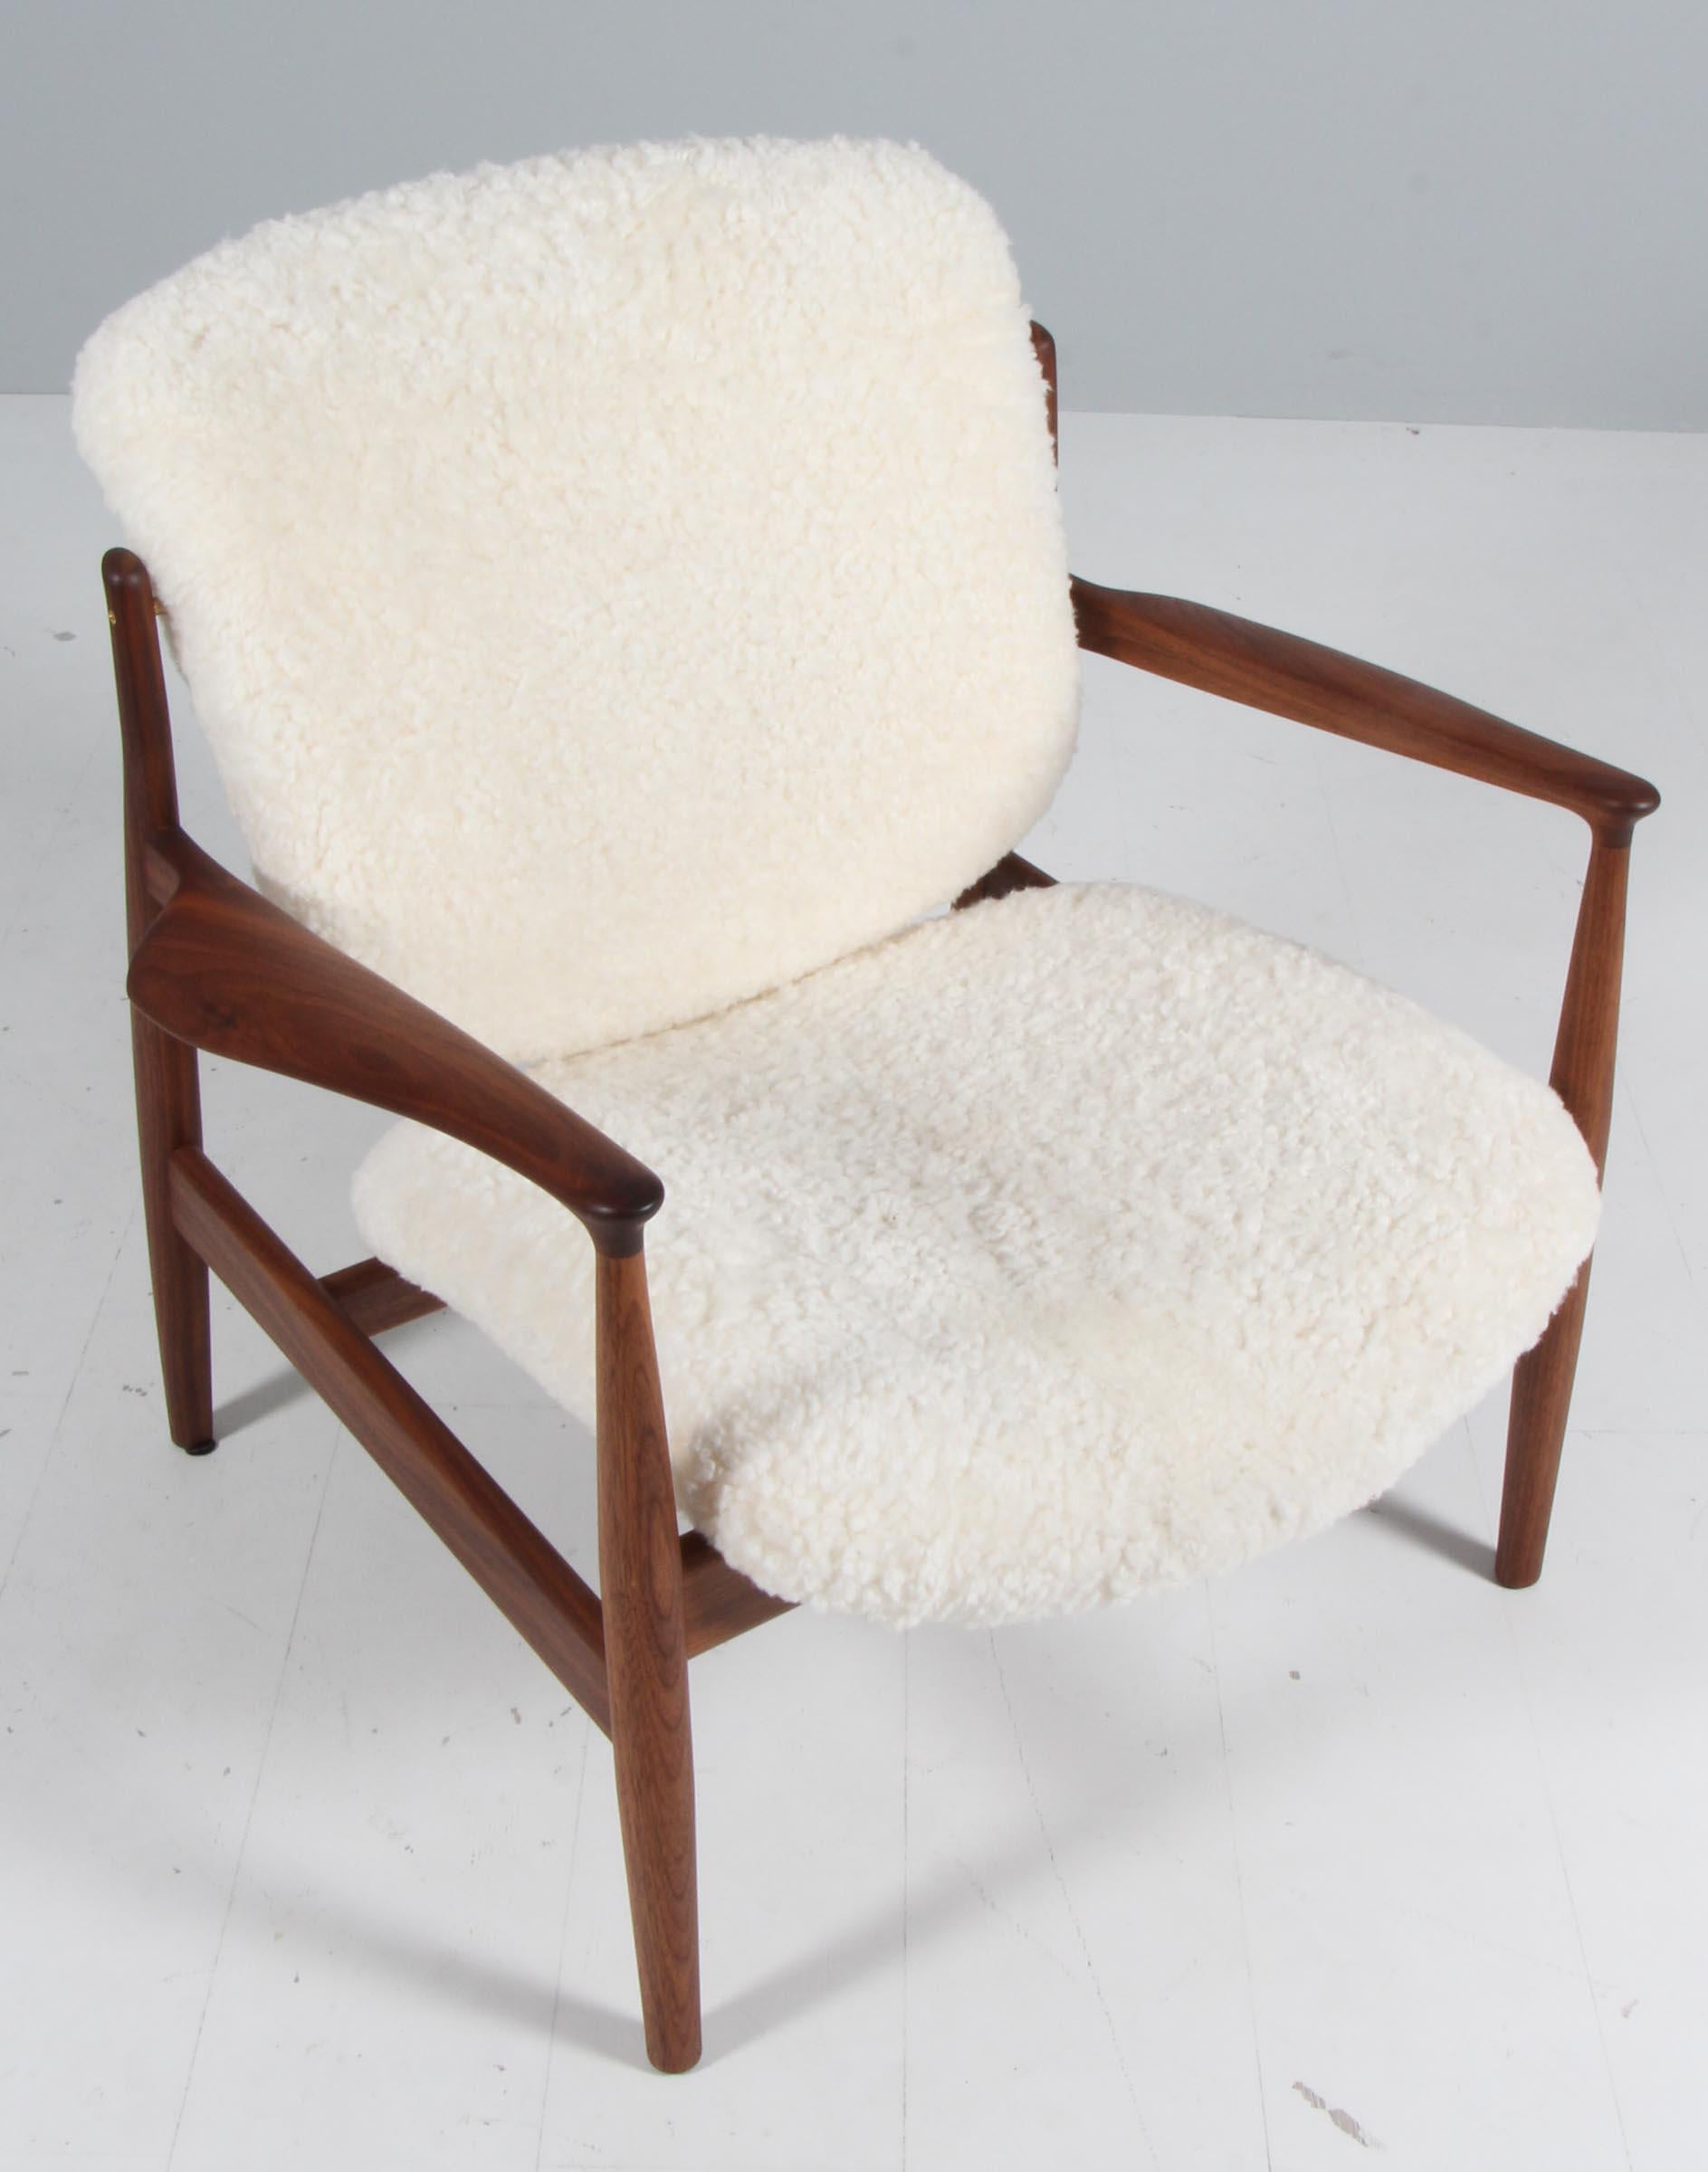 Finn Juhl lounge chair in solid walnut. 

Upholstered with white shearling.

Model France, made by Onecollection.